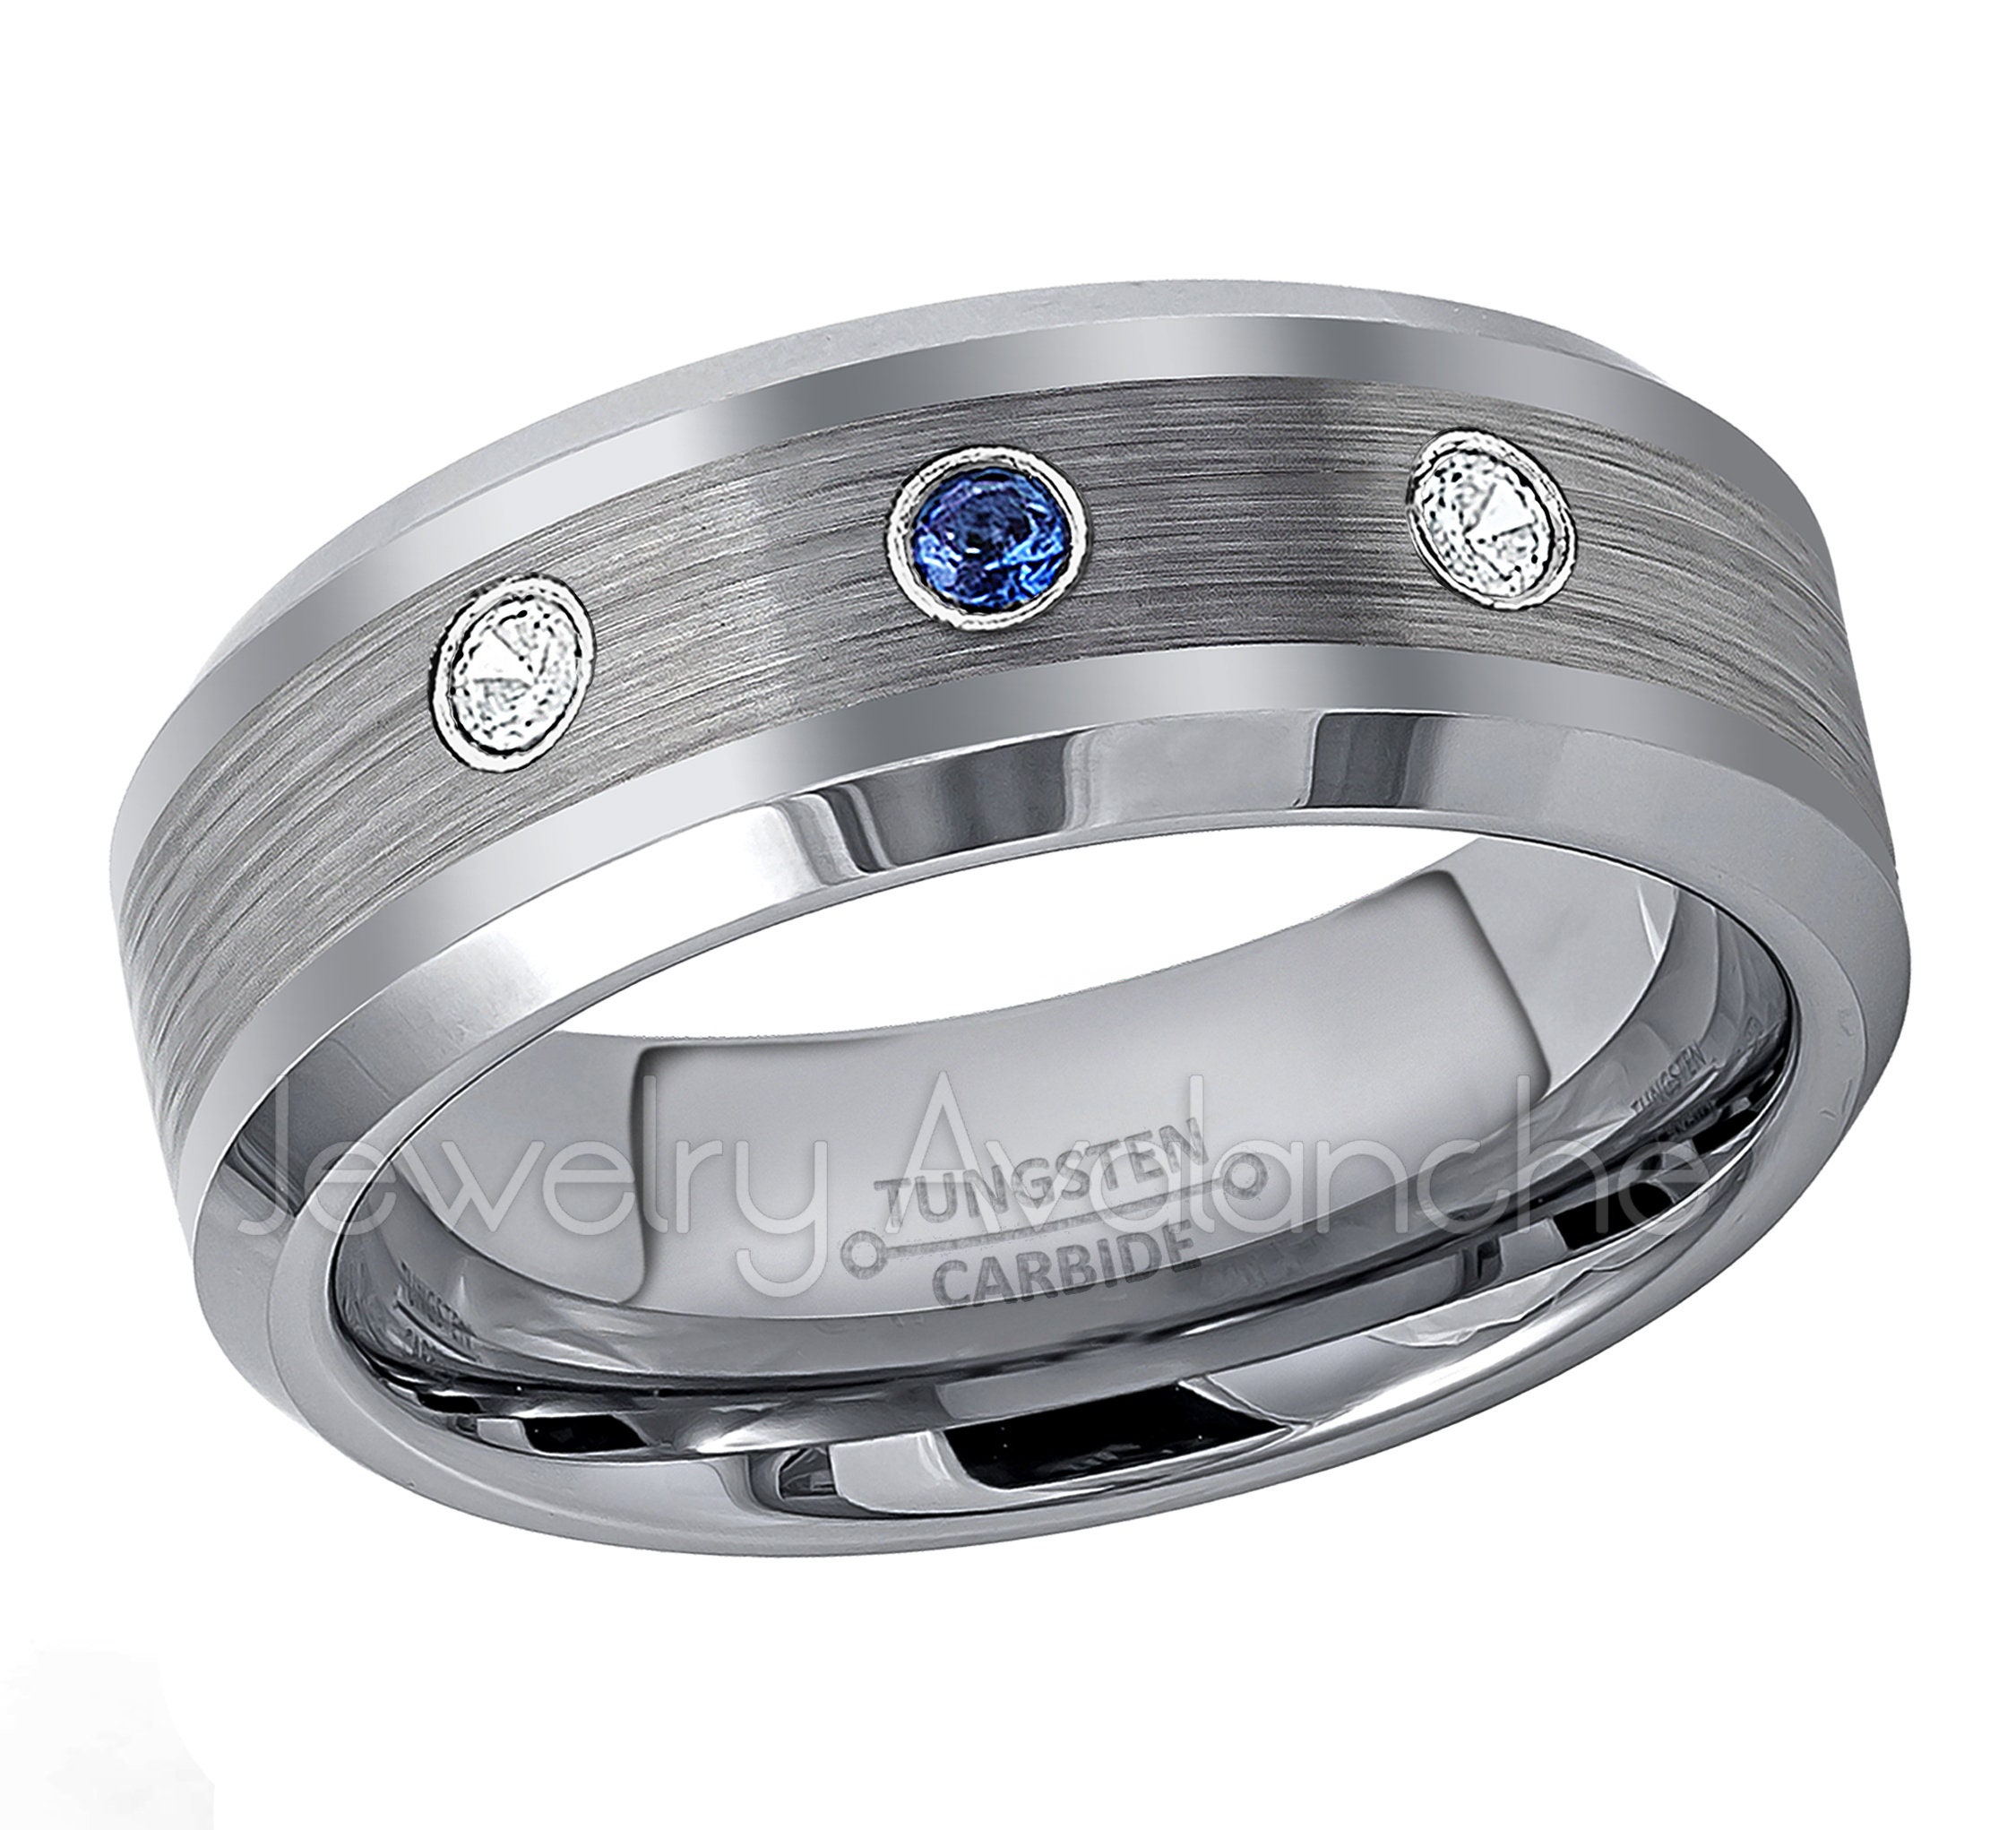 September Birthstone Ring 8MM Polished Dome Brushed Center Finish Comfort Fit White Wedding Band 0.07ct Blue Sapphire Solitaire Titanium Ring 